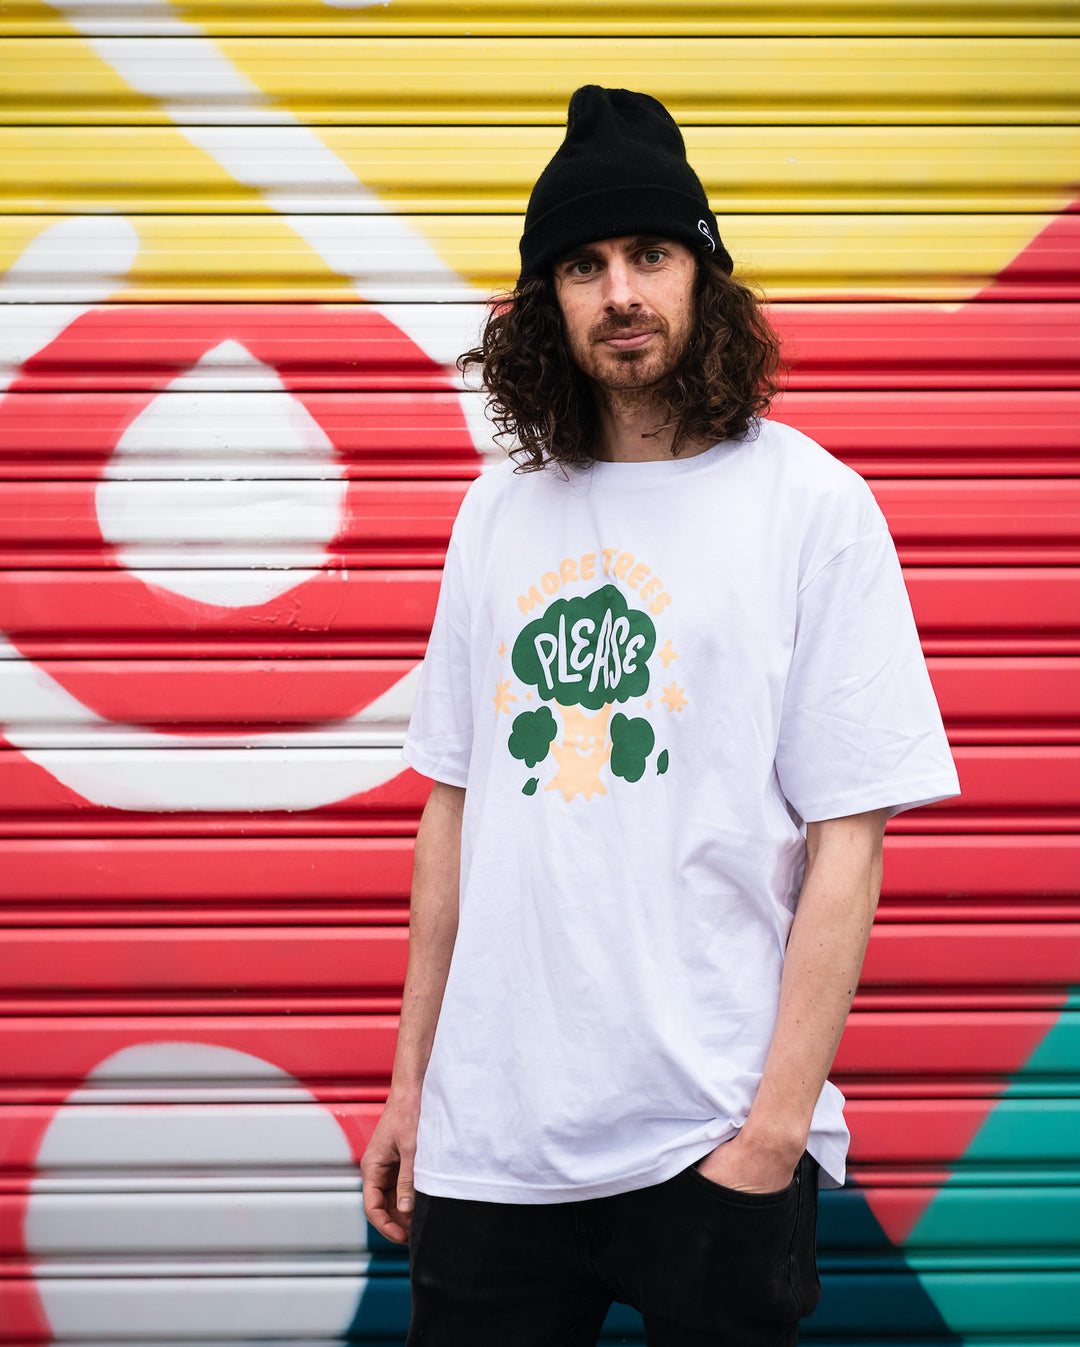 smiling man in front of colourful wall wearing white organic cotton shirt with cute cream and green design showing a smiling tree with words more trees please